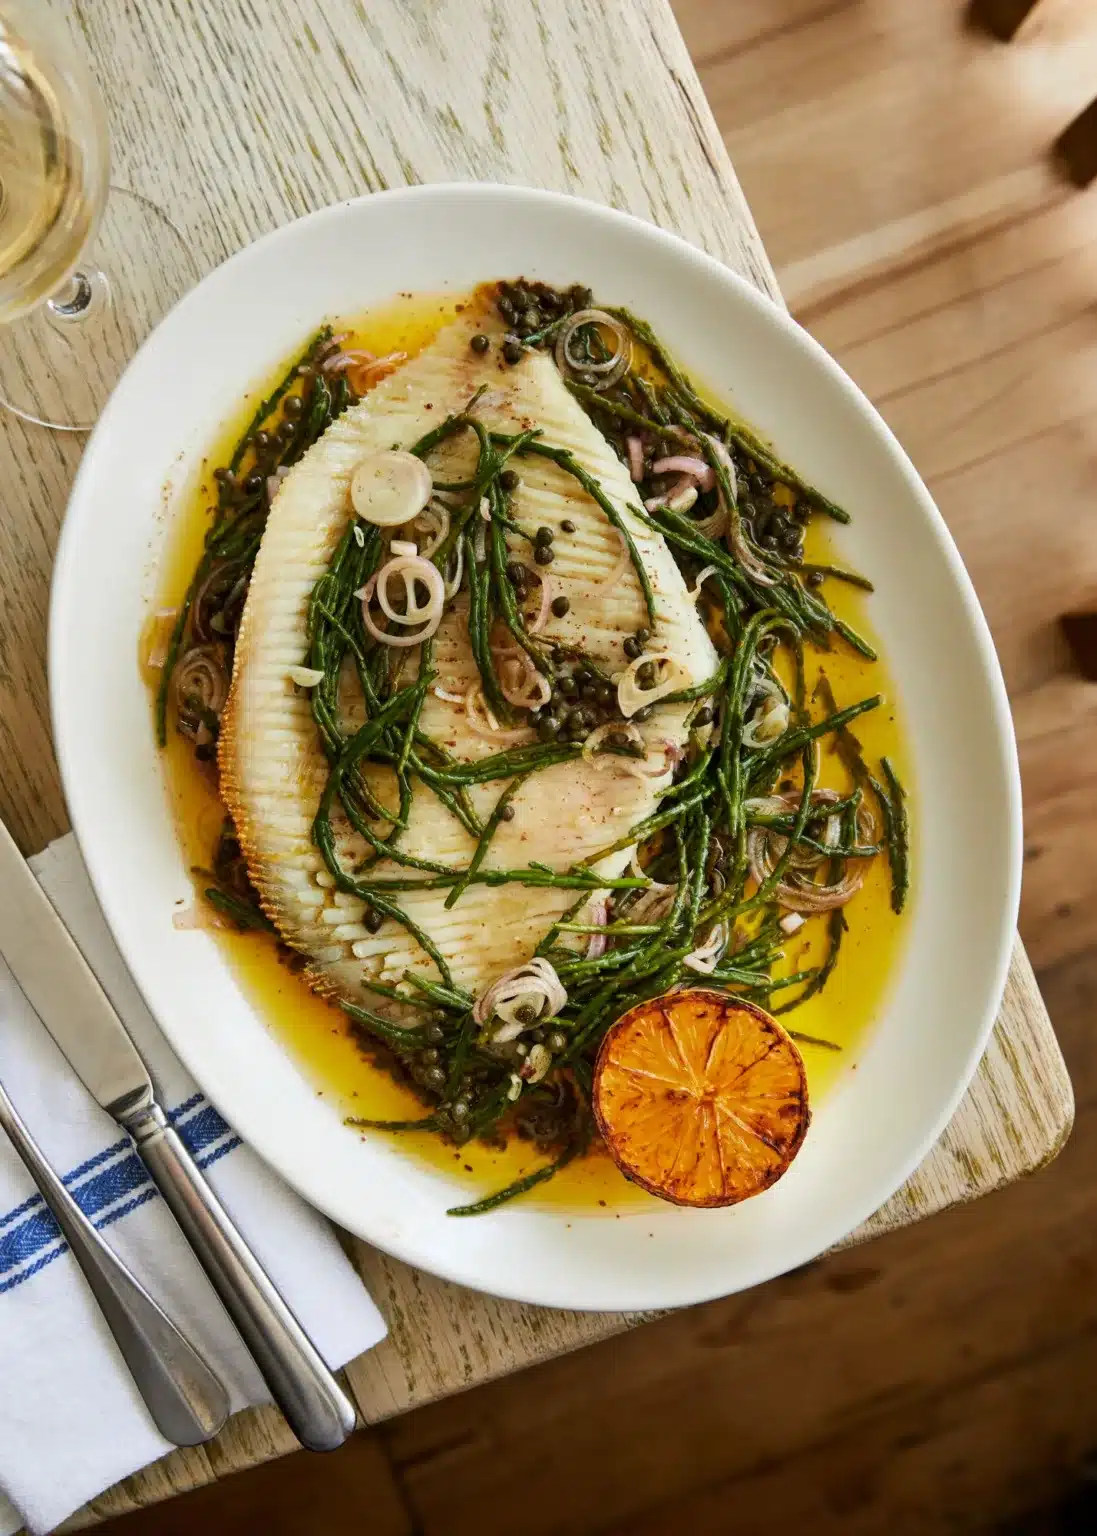 roast skate wing, samphire, lemon and brown butter at the union rye (credit sam a harris)